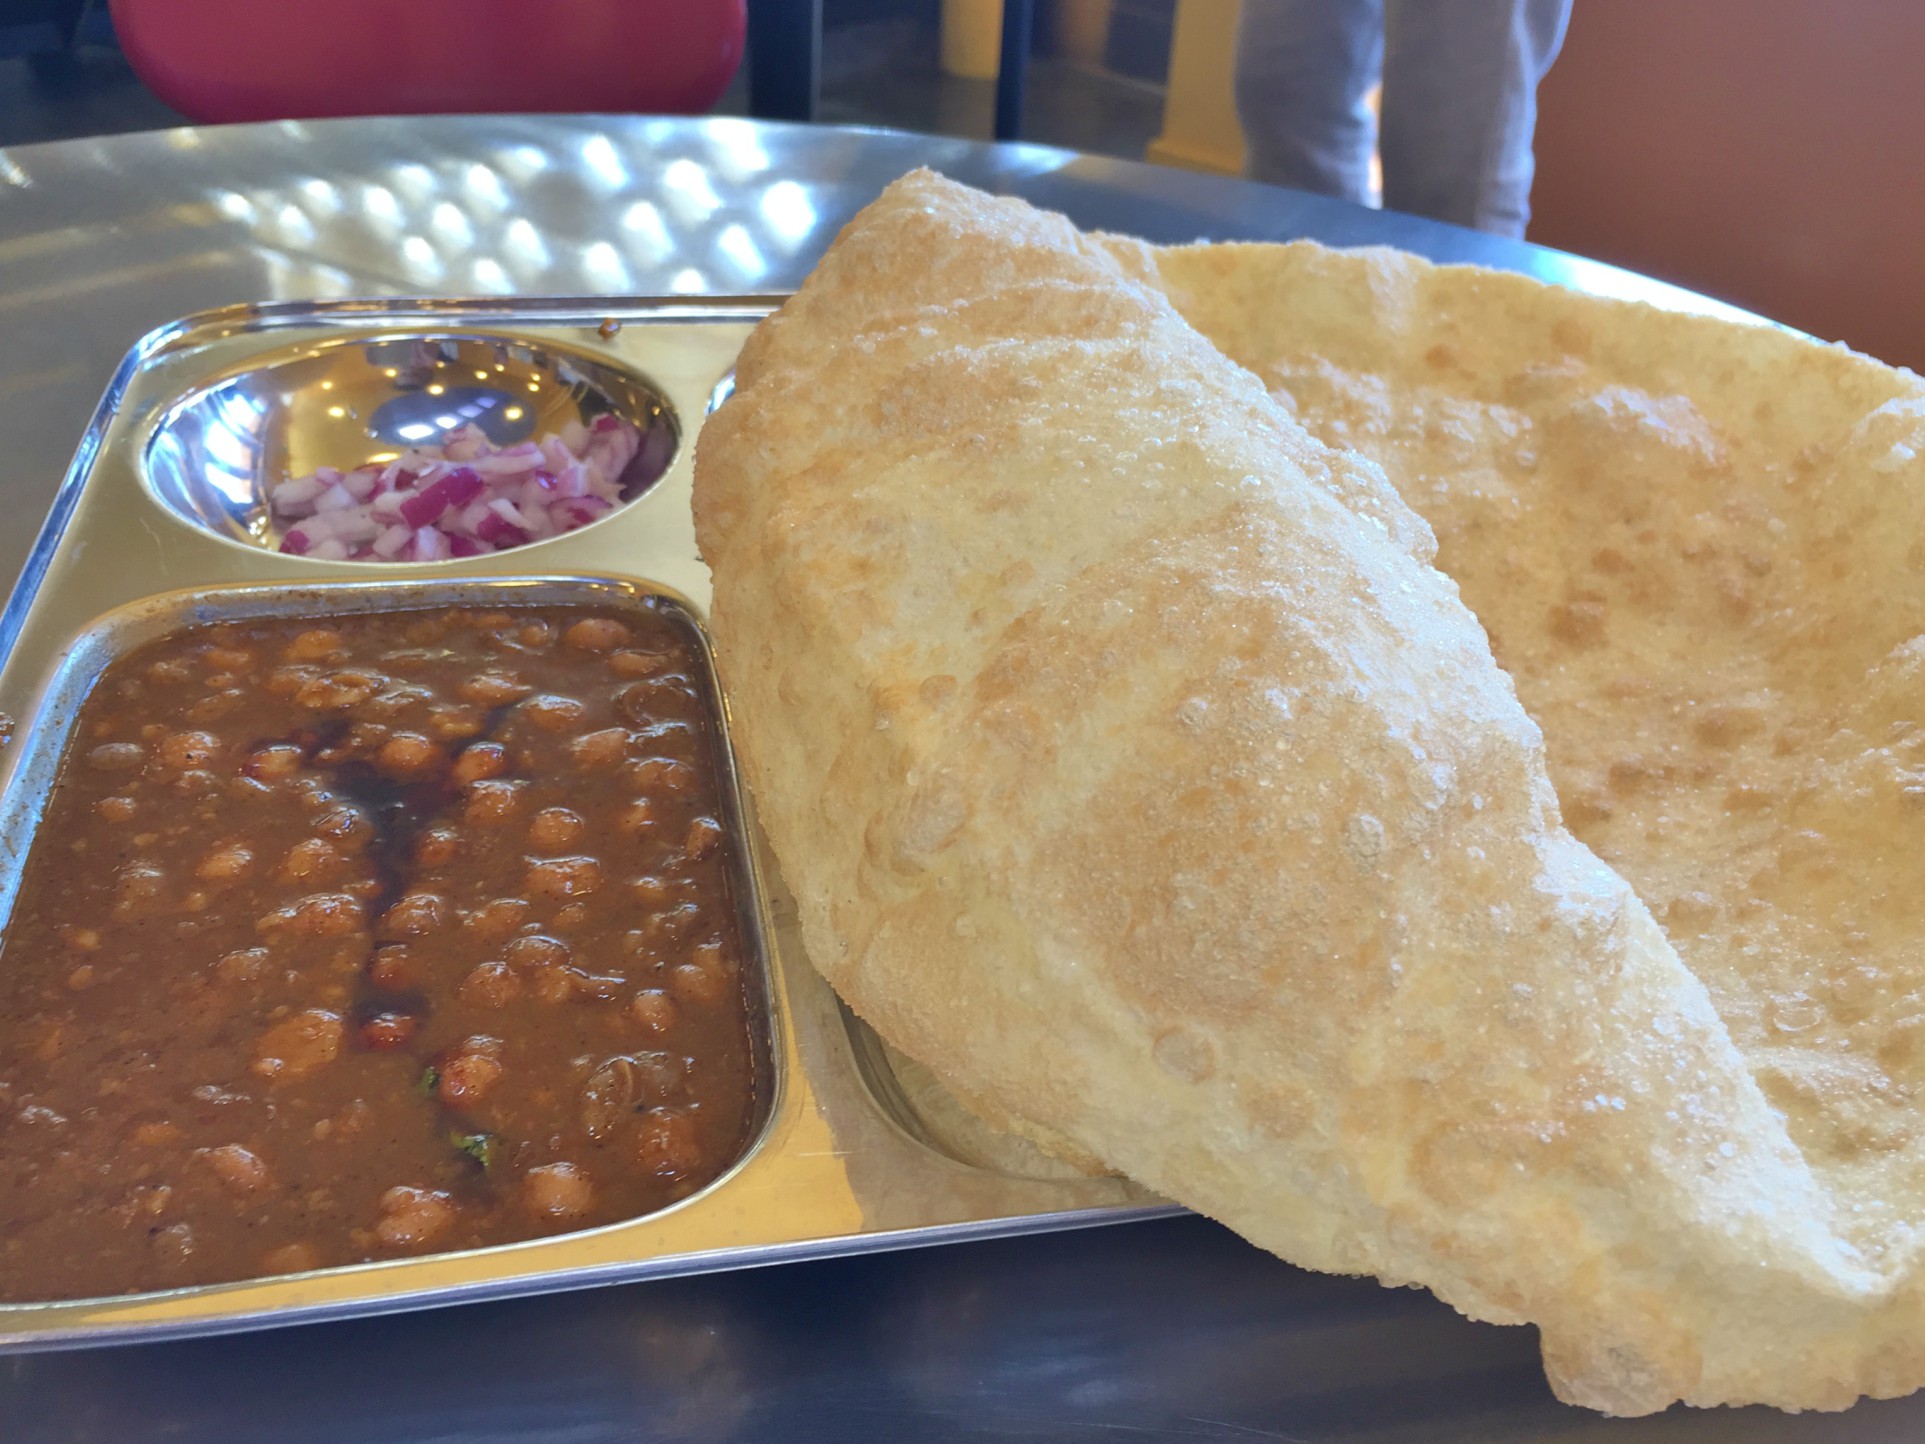 The rapidly-deflating cholle bhature makes a perfect vehicle for scooping up chana masala.